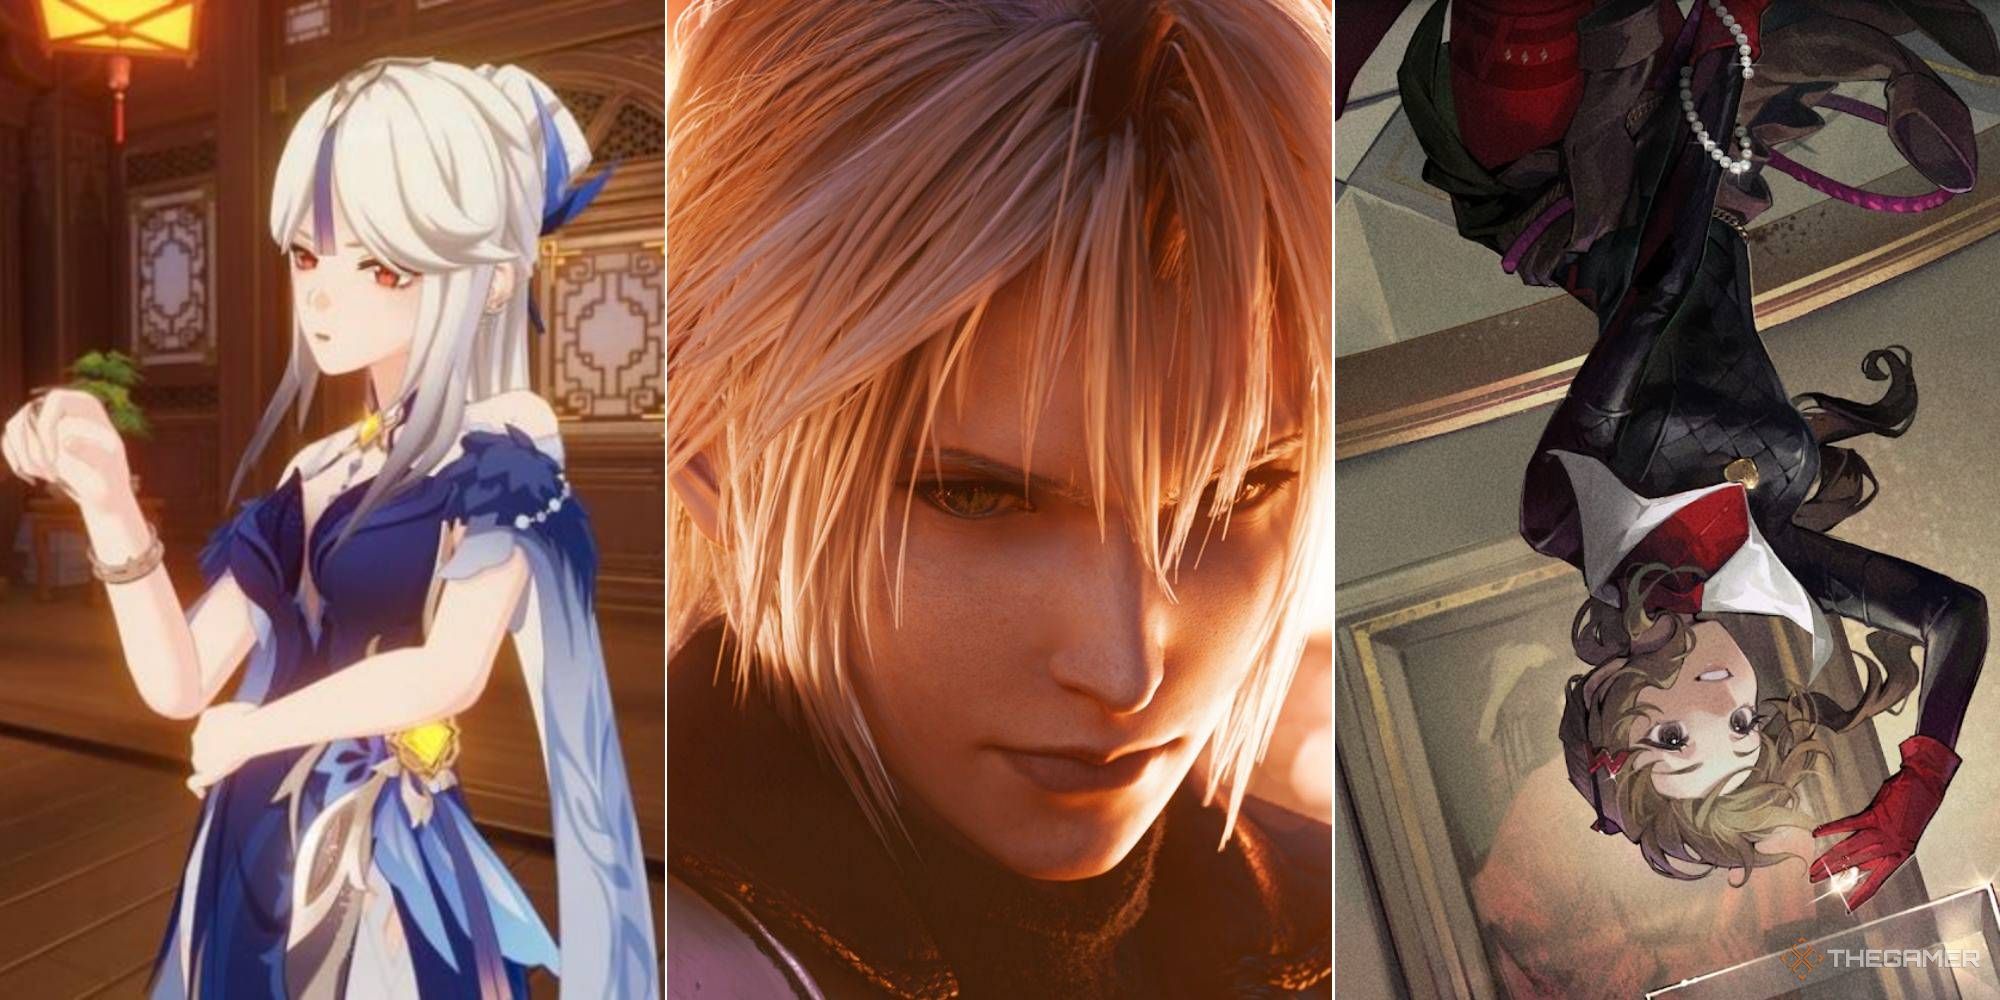 A three-panel image showing, from left to right, Ningguang from Genshin Impact, young Sephiroth from Final Fantasy Ever Crisis, and Melania from Reverse: 1999